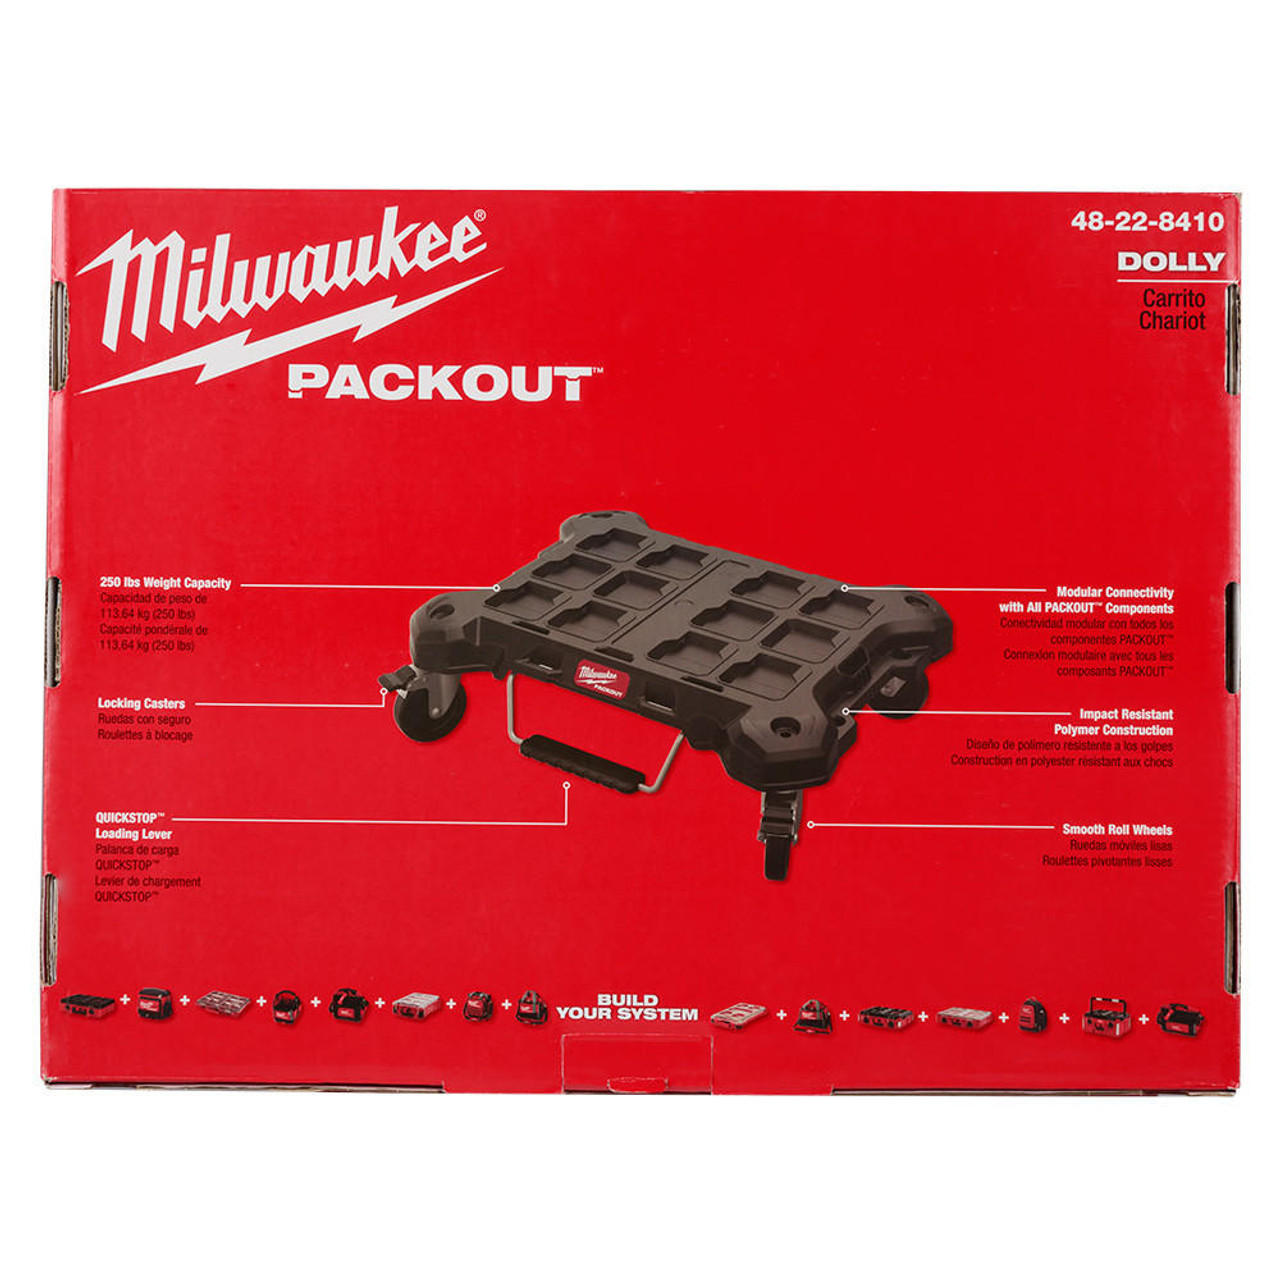  Milwaukee PACKOUT Dolly 48-22-8410 